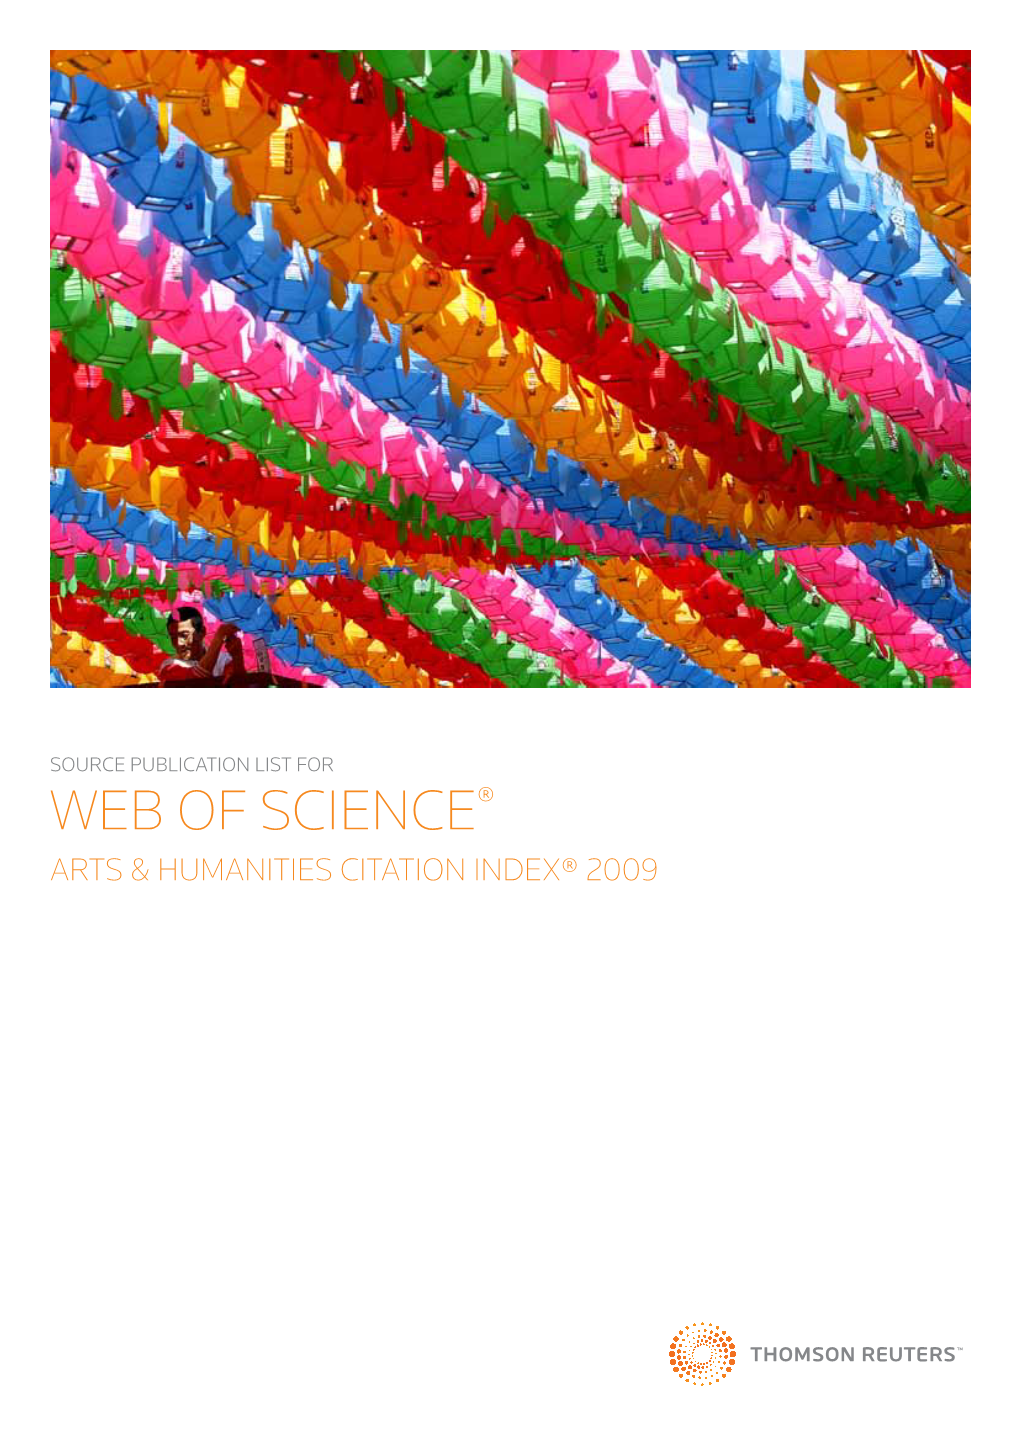 Web of Science® Arts & Humanities Citation Index® 2009 WEB of SCIENCE® - ARTS & HUMANITIES CITATION INDEX SOURCE PUBLICATIONS